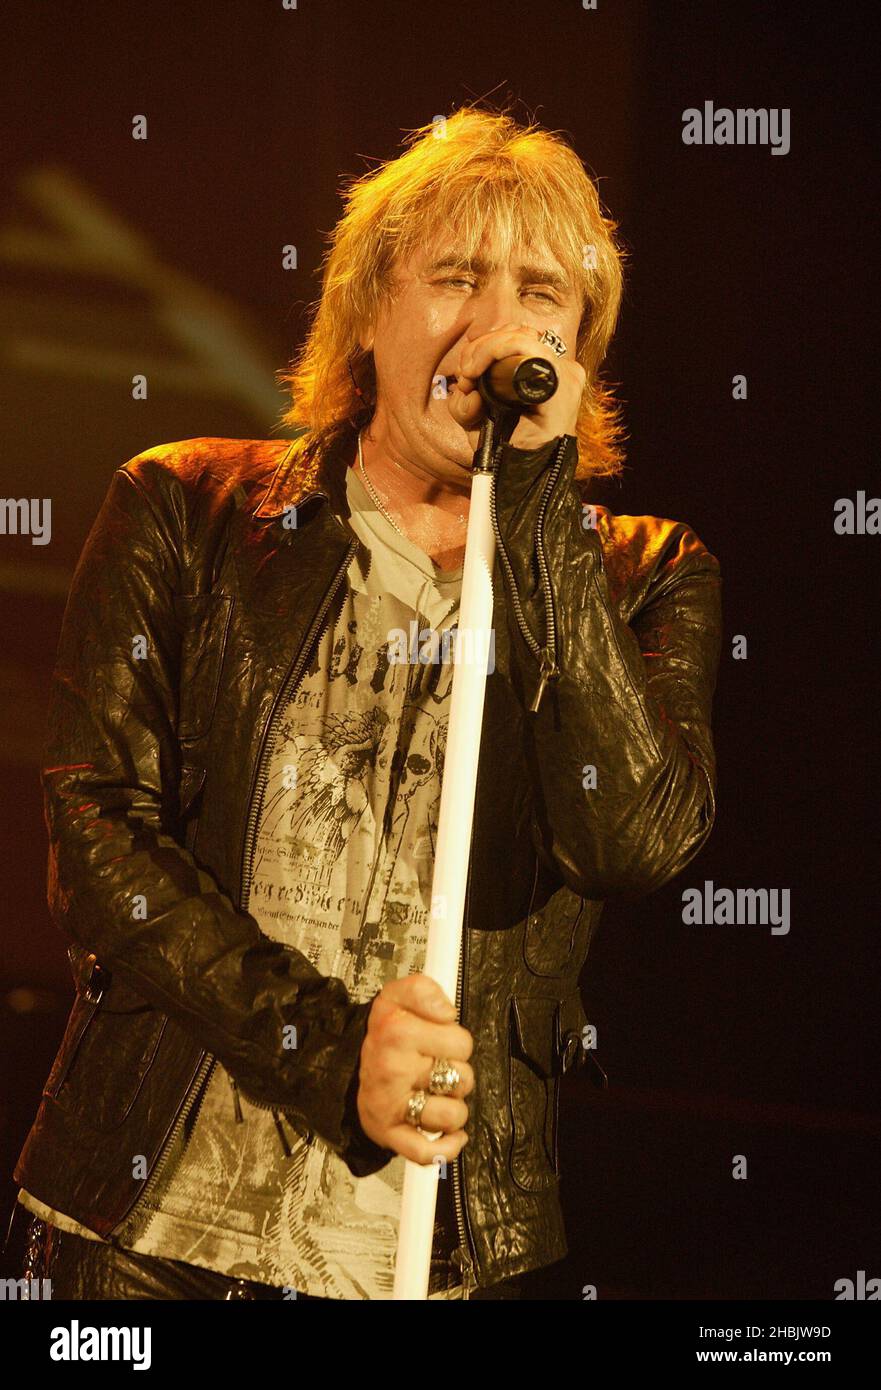 Vivian Camphell, Joe Elliott, Rick Allen, Phil Collen of Def Leppard performs on stage at live show promoting their new album 'Yeah'. Stock Photo